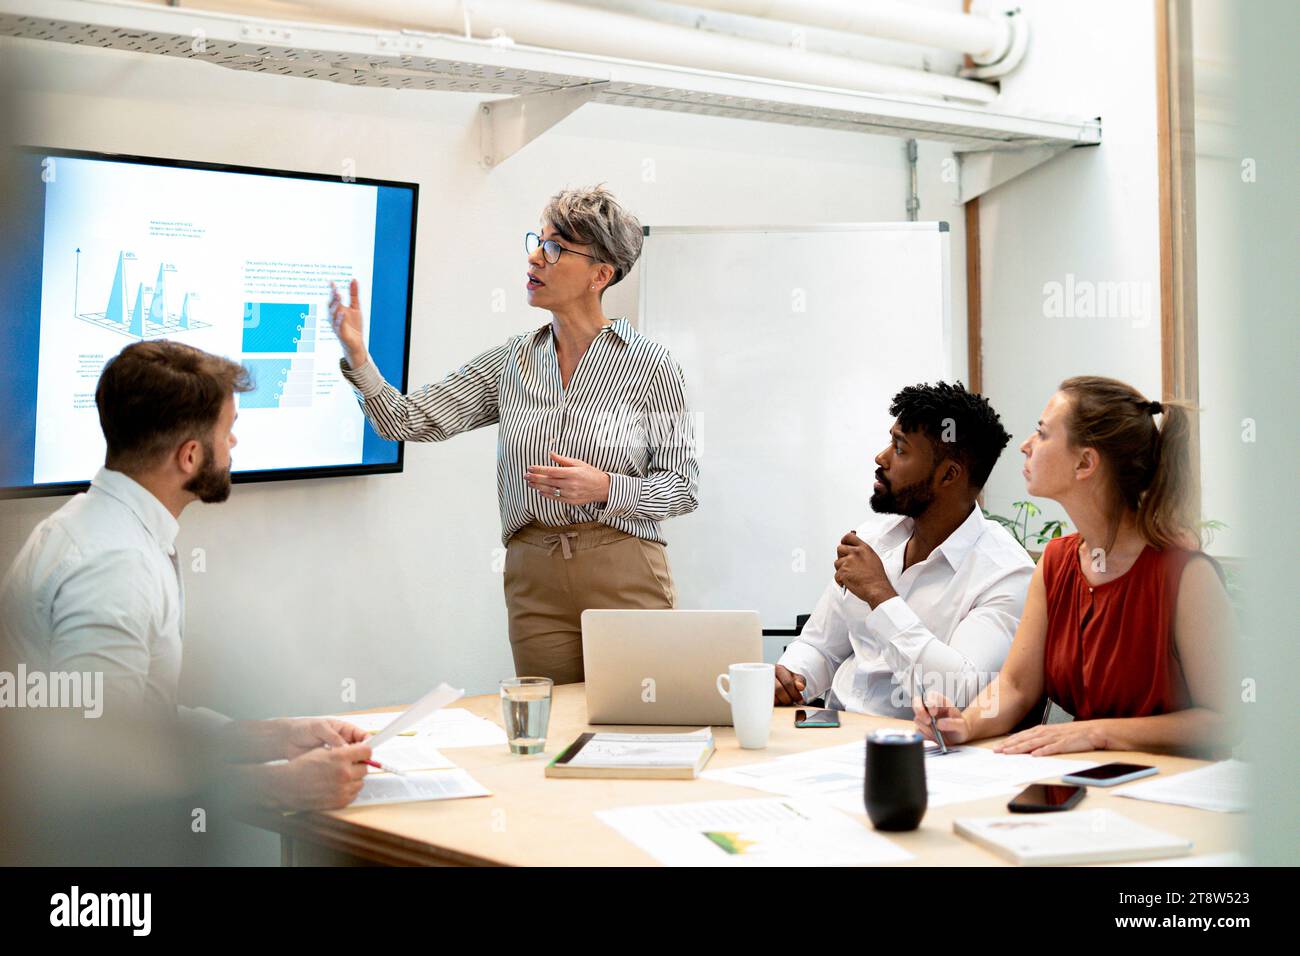 Businesswomen doing a presentation to colleagues at conference room Stock Photo